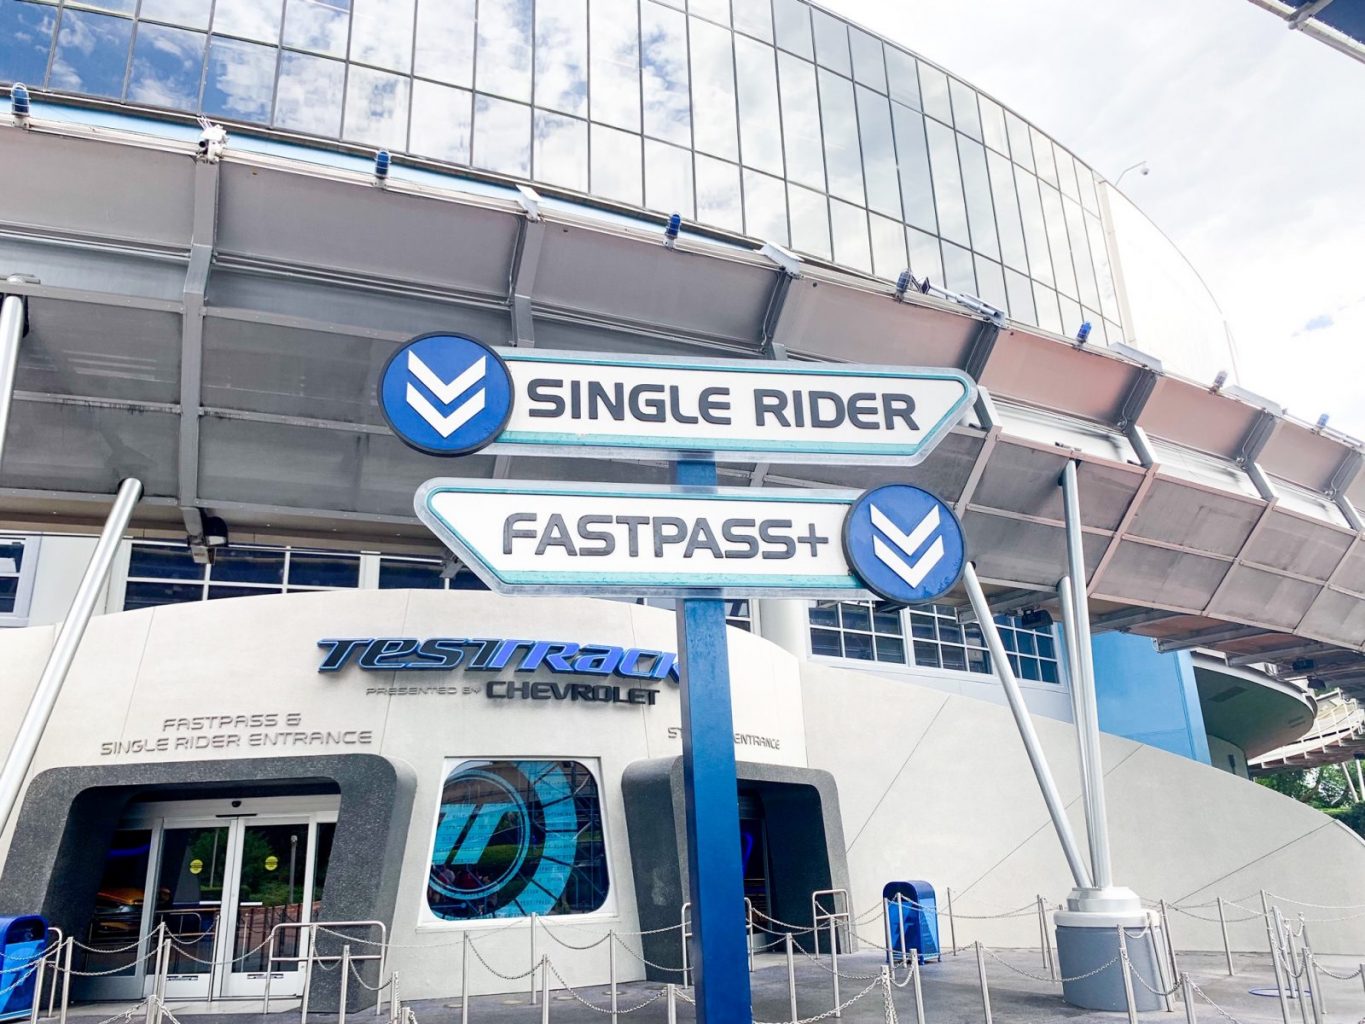 fastpass and single rider entrance to test track ride